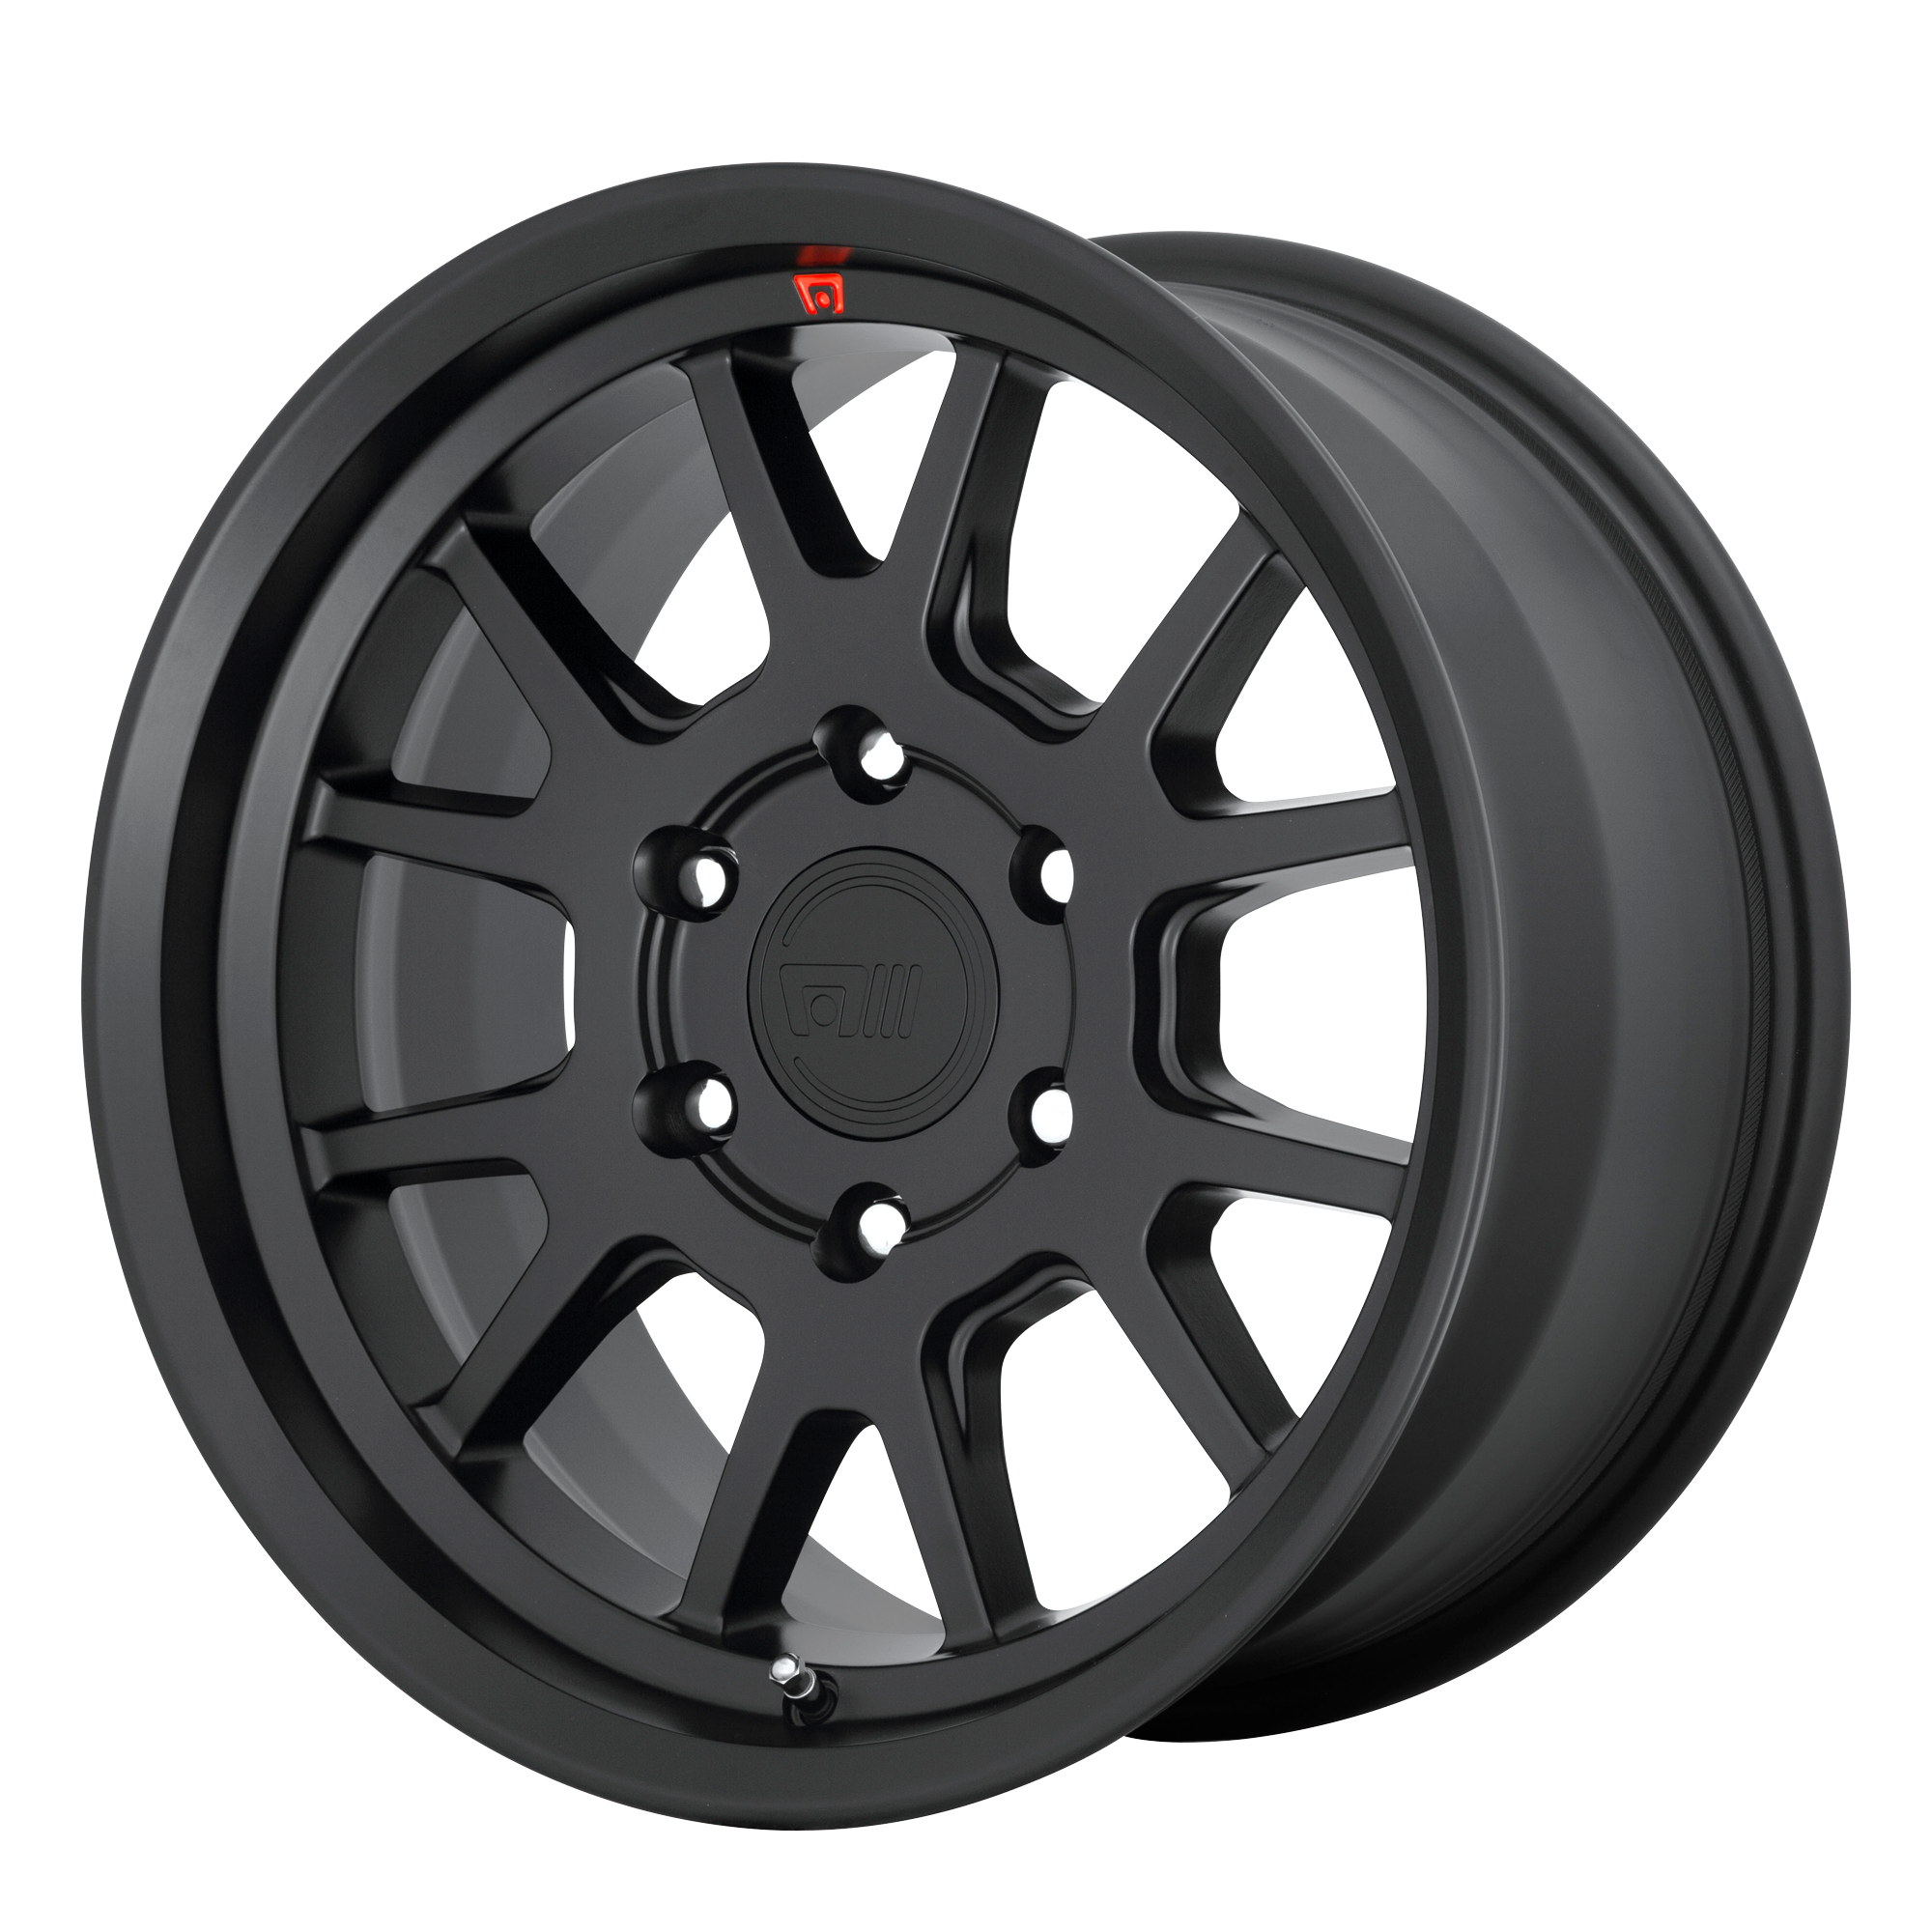 MT6 17x8.5 6x139.70 SATIN BLACK (18 mm) - Tires and Engine Performance